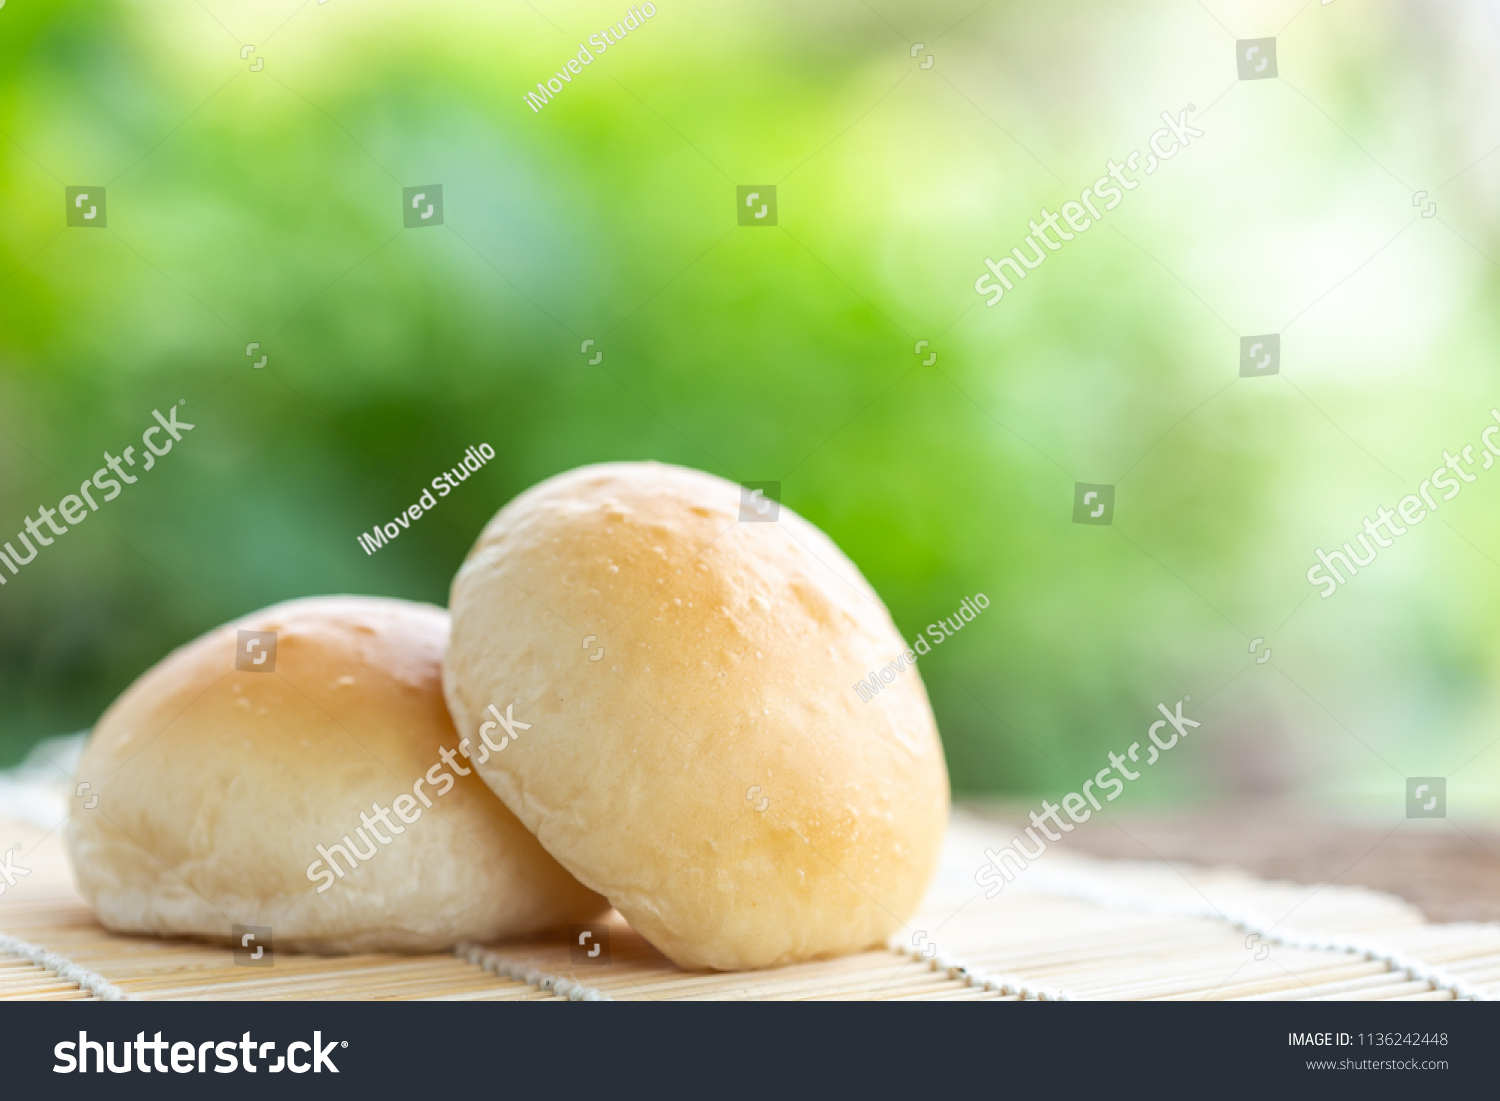 Close up two of bread on wooden table with green blur light background. Food concept #1136242448